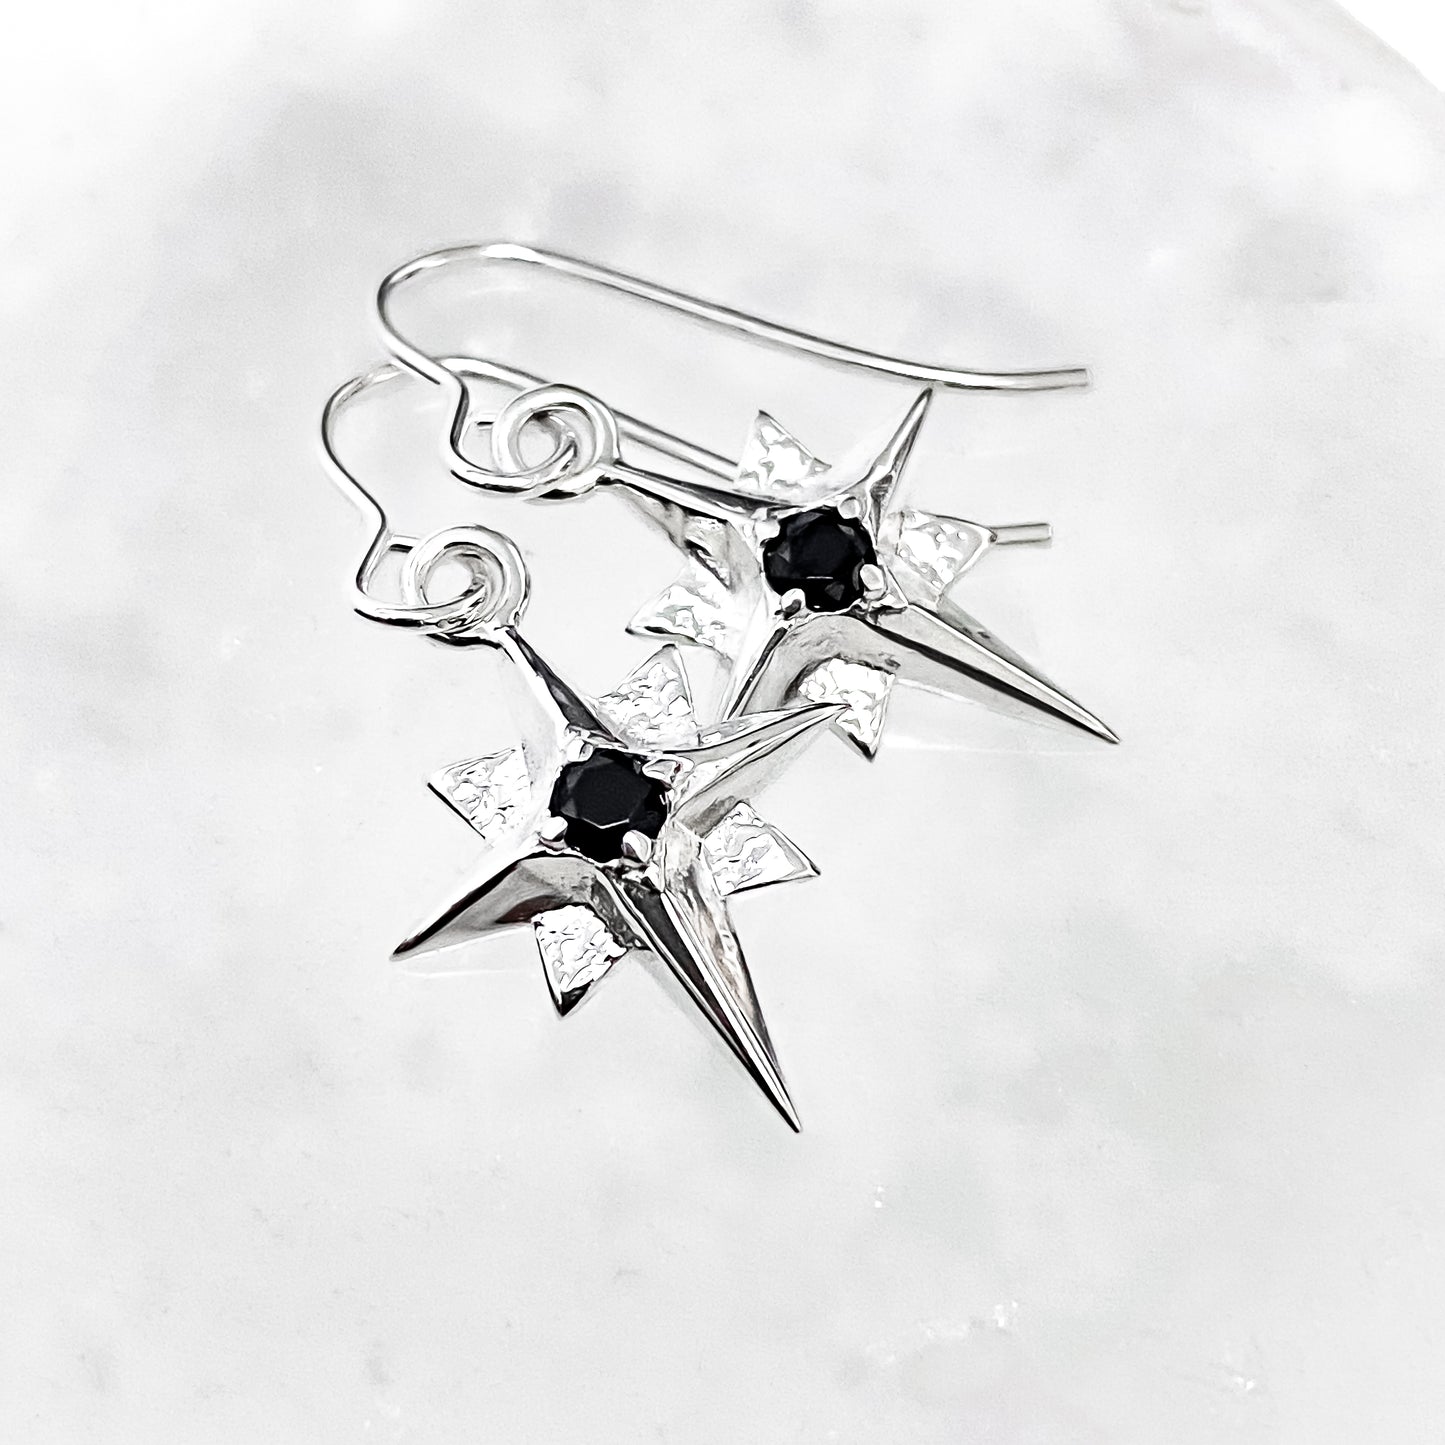 North Star Sterling Silver Earrings with Black Spinel